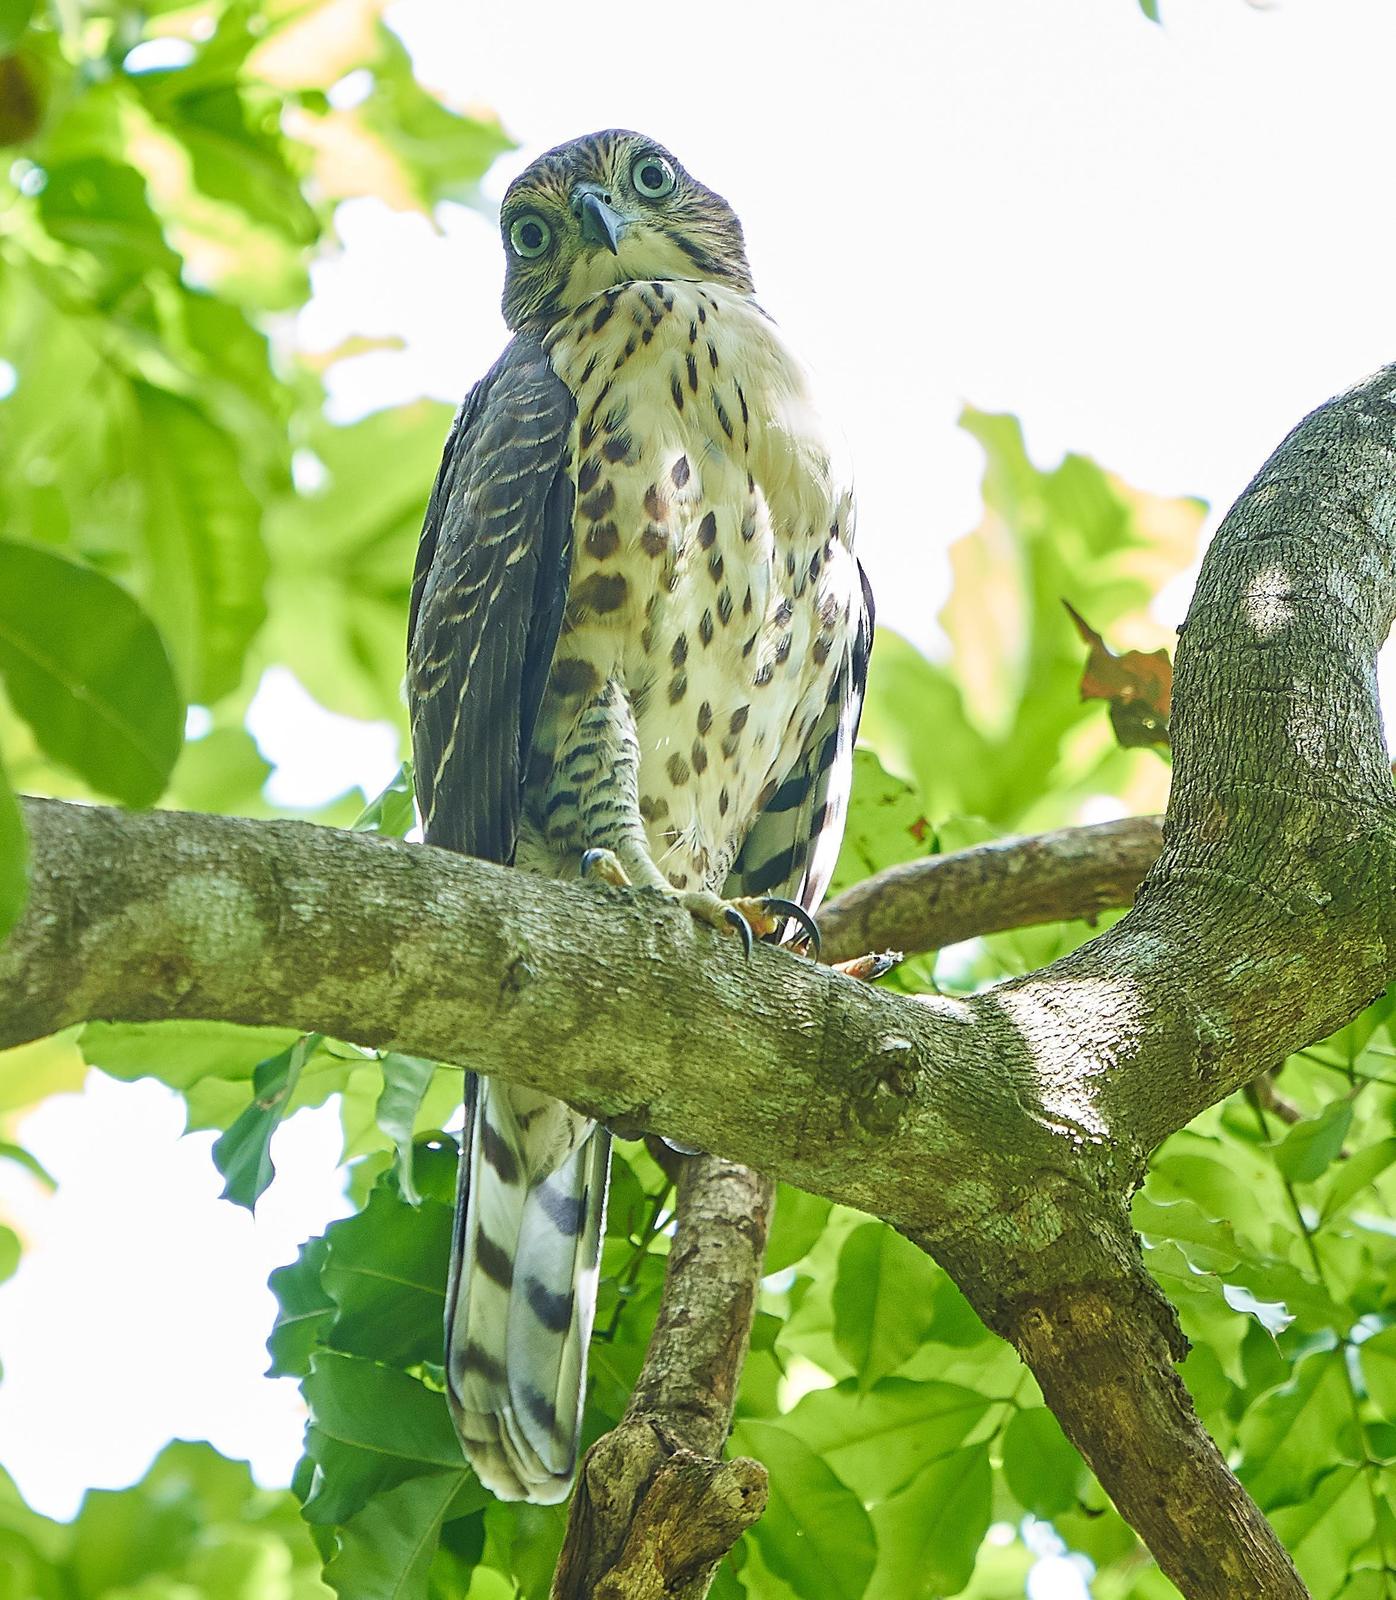 Crested Goshawk Photo by Steven Cheong